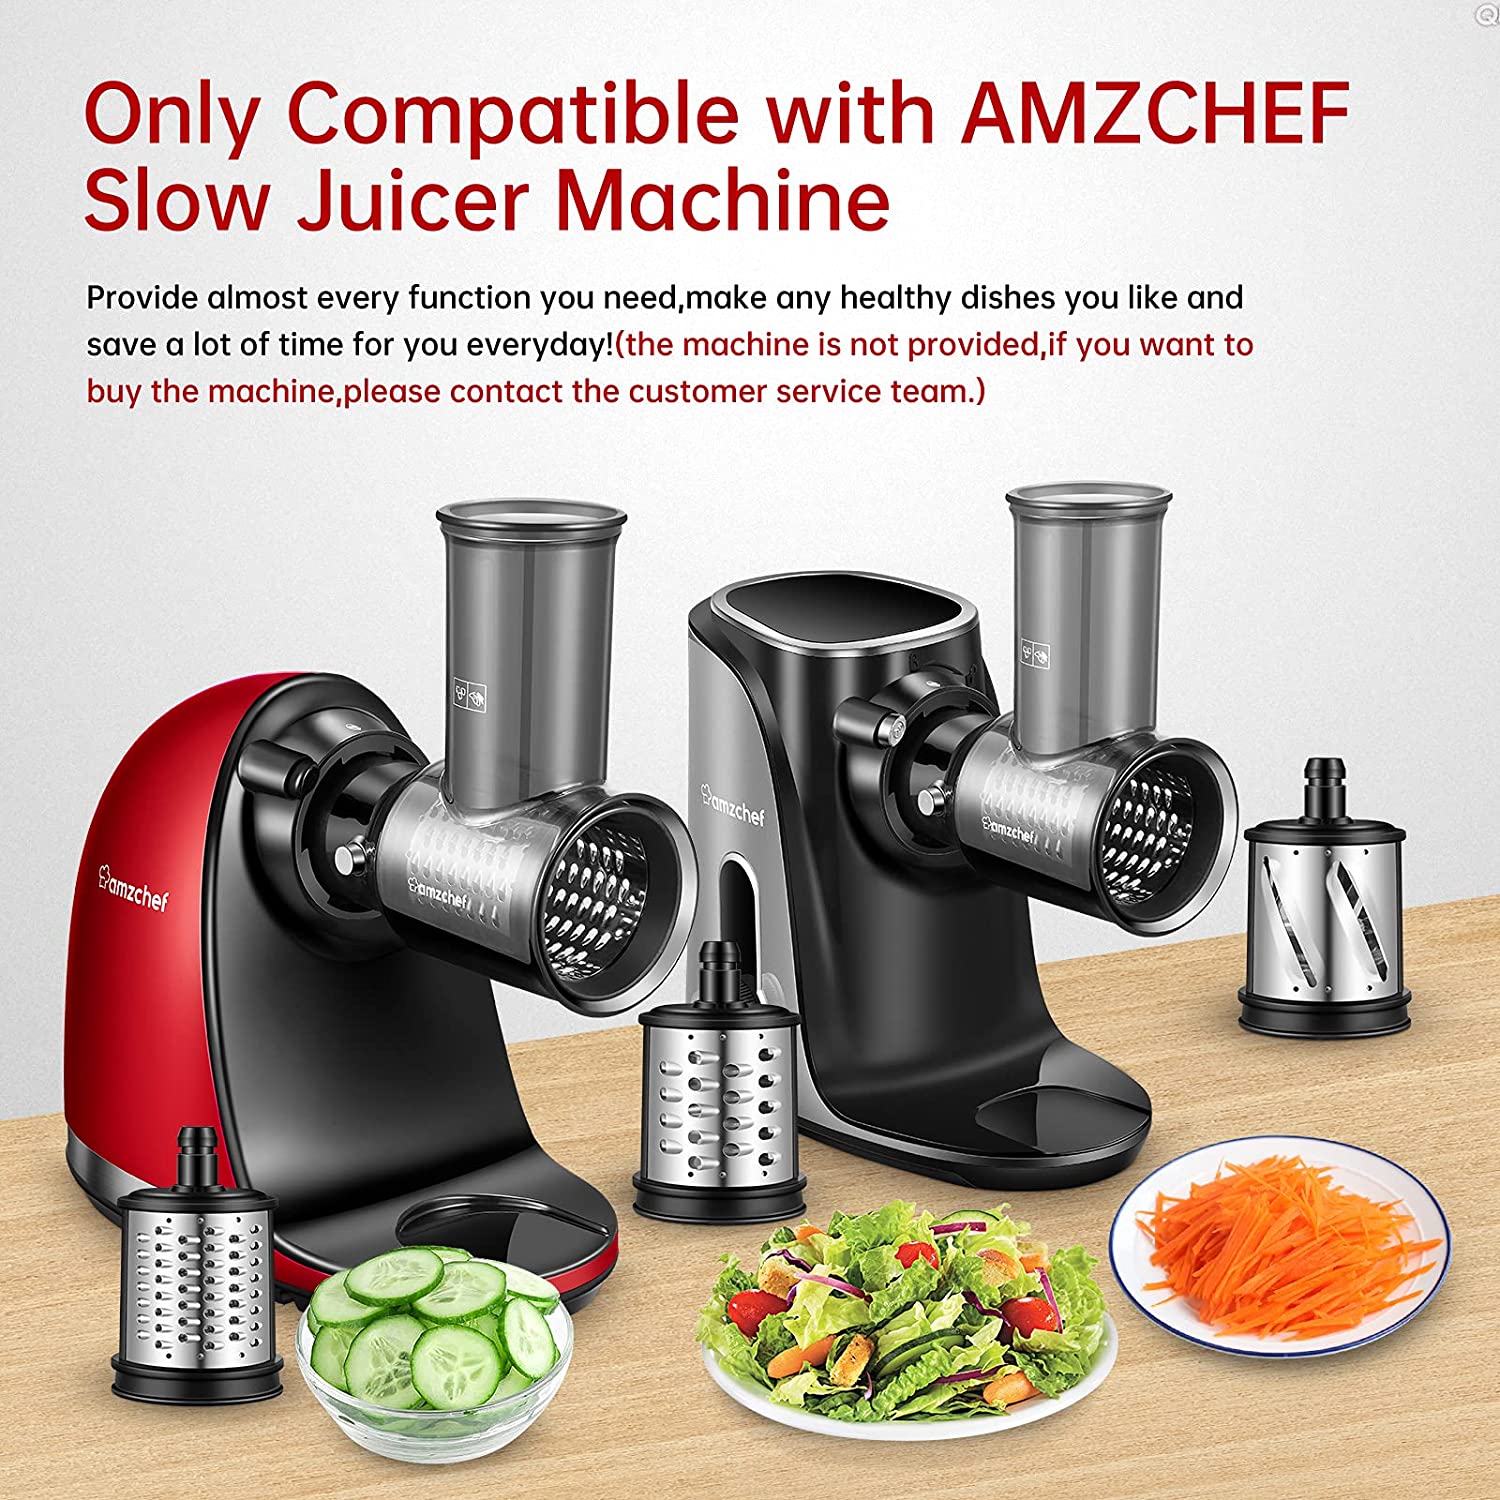 AMZCHEF Slow Juicer food slicers cheese grater attachment